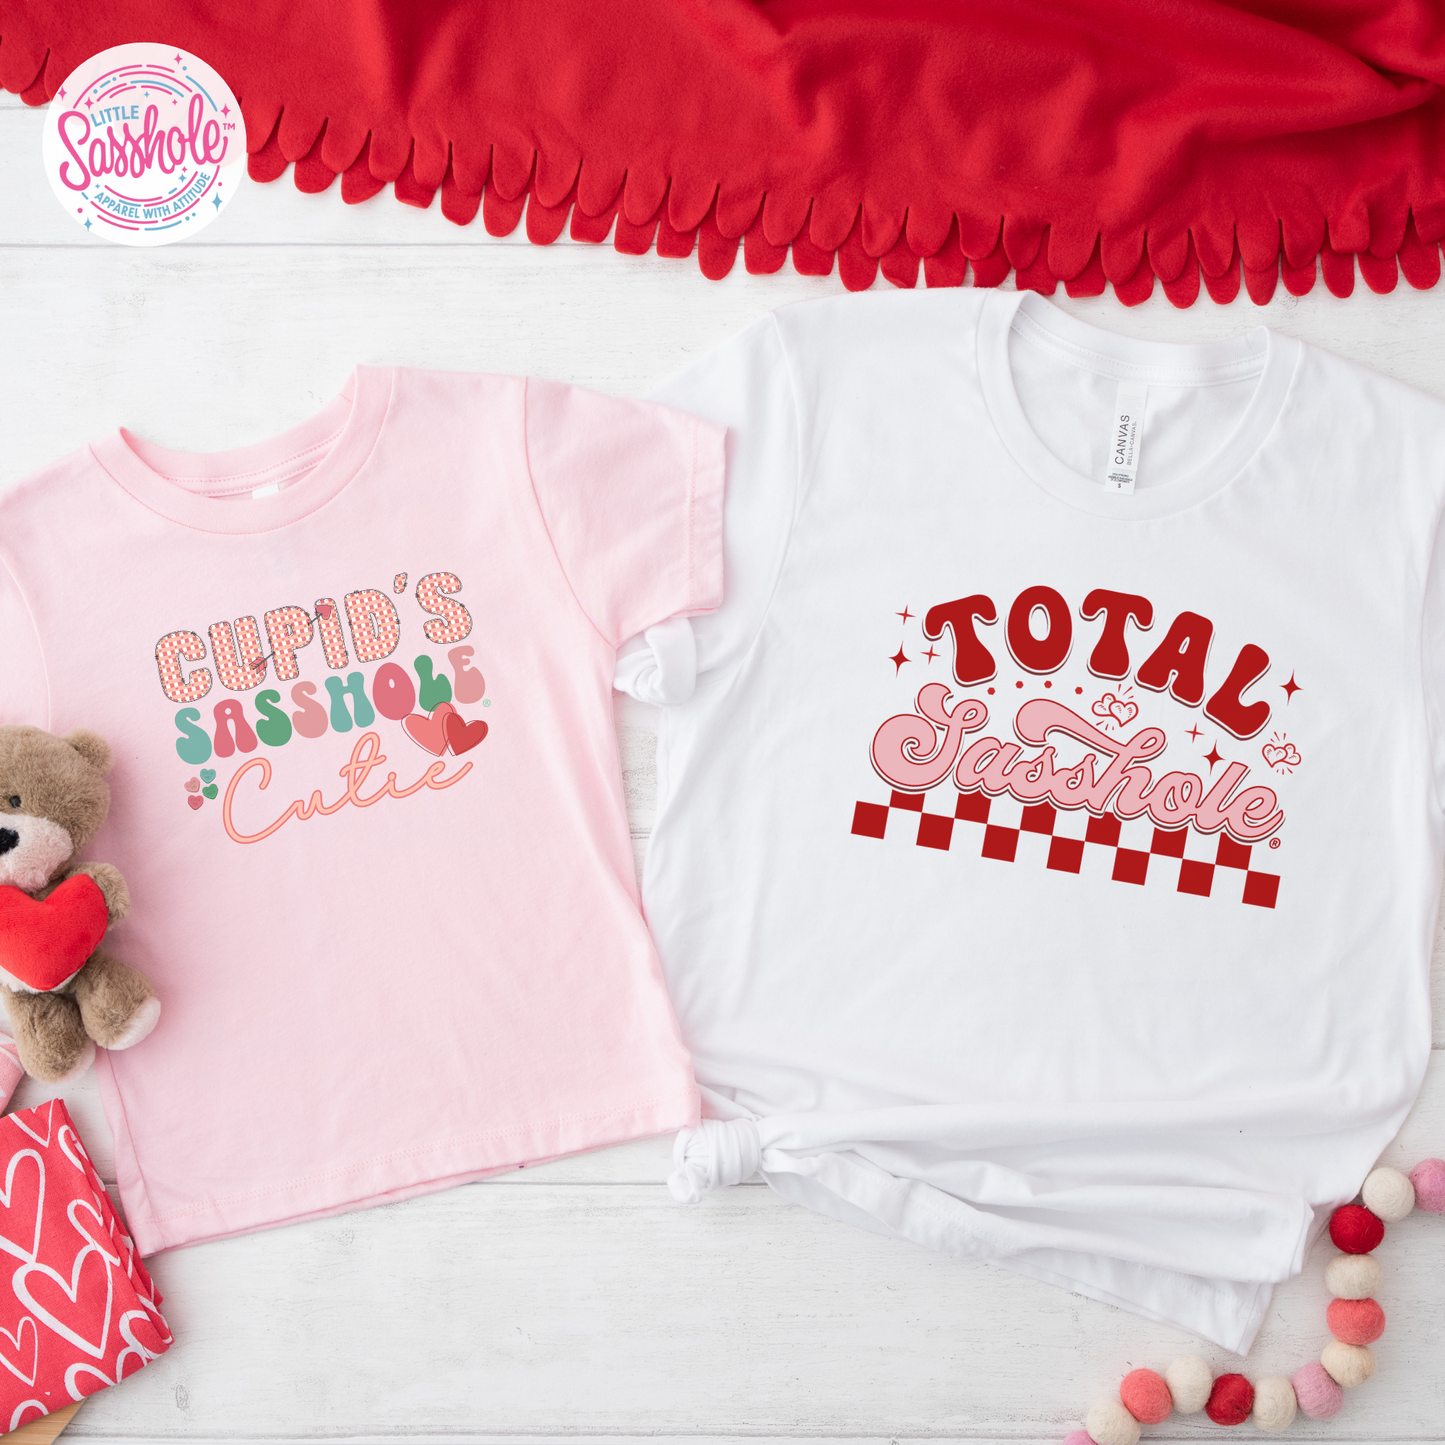 Valentine's wardrobe for toddlers, Valentine's fashion for little ones, Valentine's Day toddler style, Valentine's cuteness for toddlers, Valentine vibes toddler tee, Valentine toddler shirt, Valentine princess tee, Valentine joy for toddlers, Toddler girl's love-themed clothing, Toddler fashion for the love season, Toddler fashion for love season, Toddler cupid t-shirt, Toddler cupid in action tee, Toddler cupid fashion, T-shirts, Sweetheart toddler girl style, Sweetheart toddler girl apparel